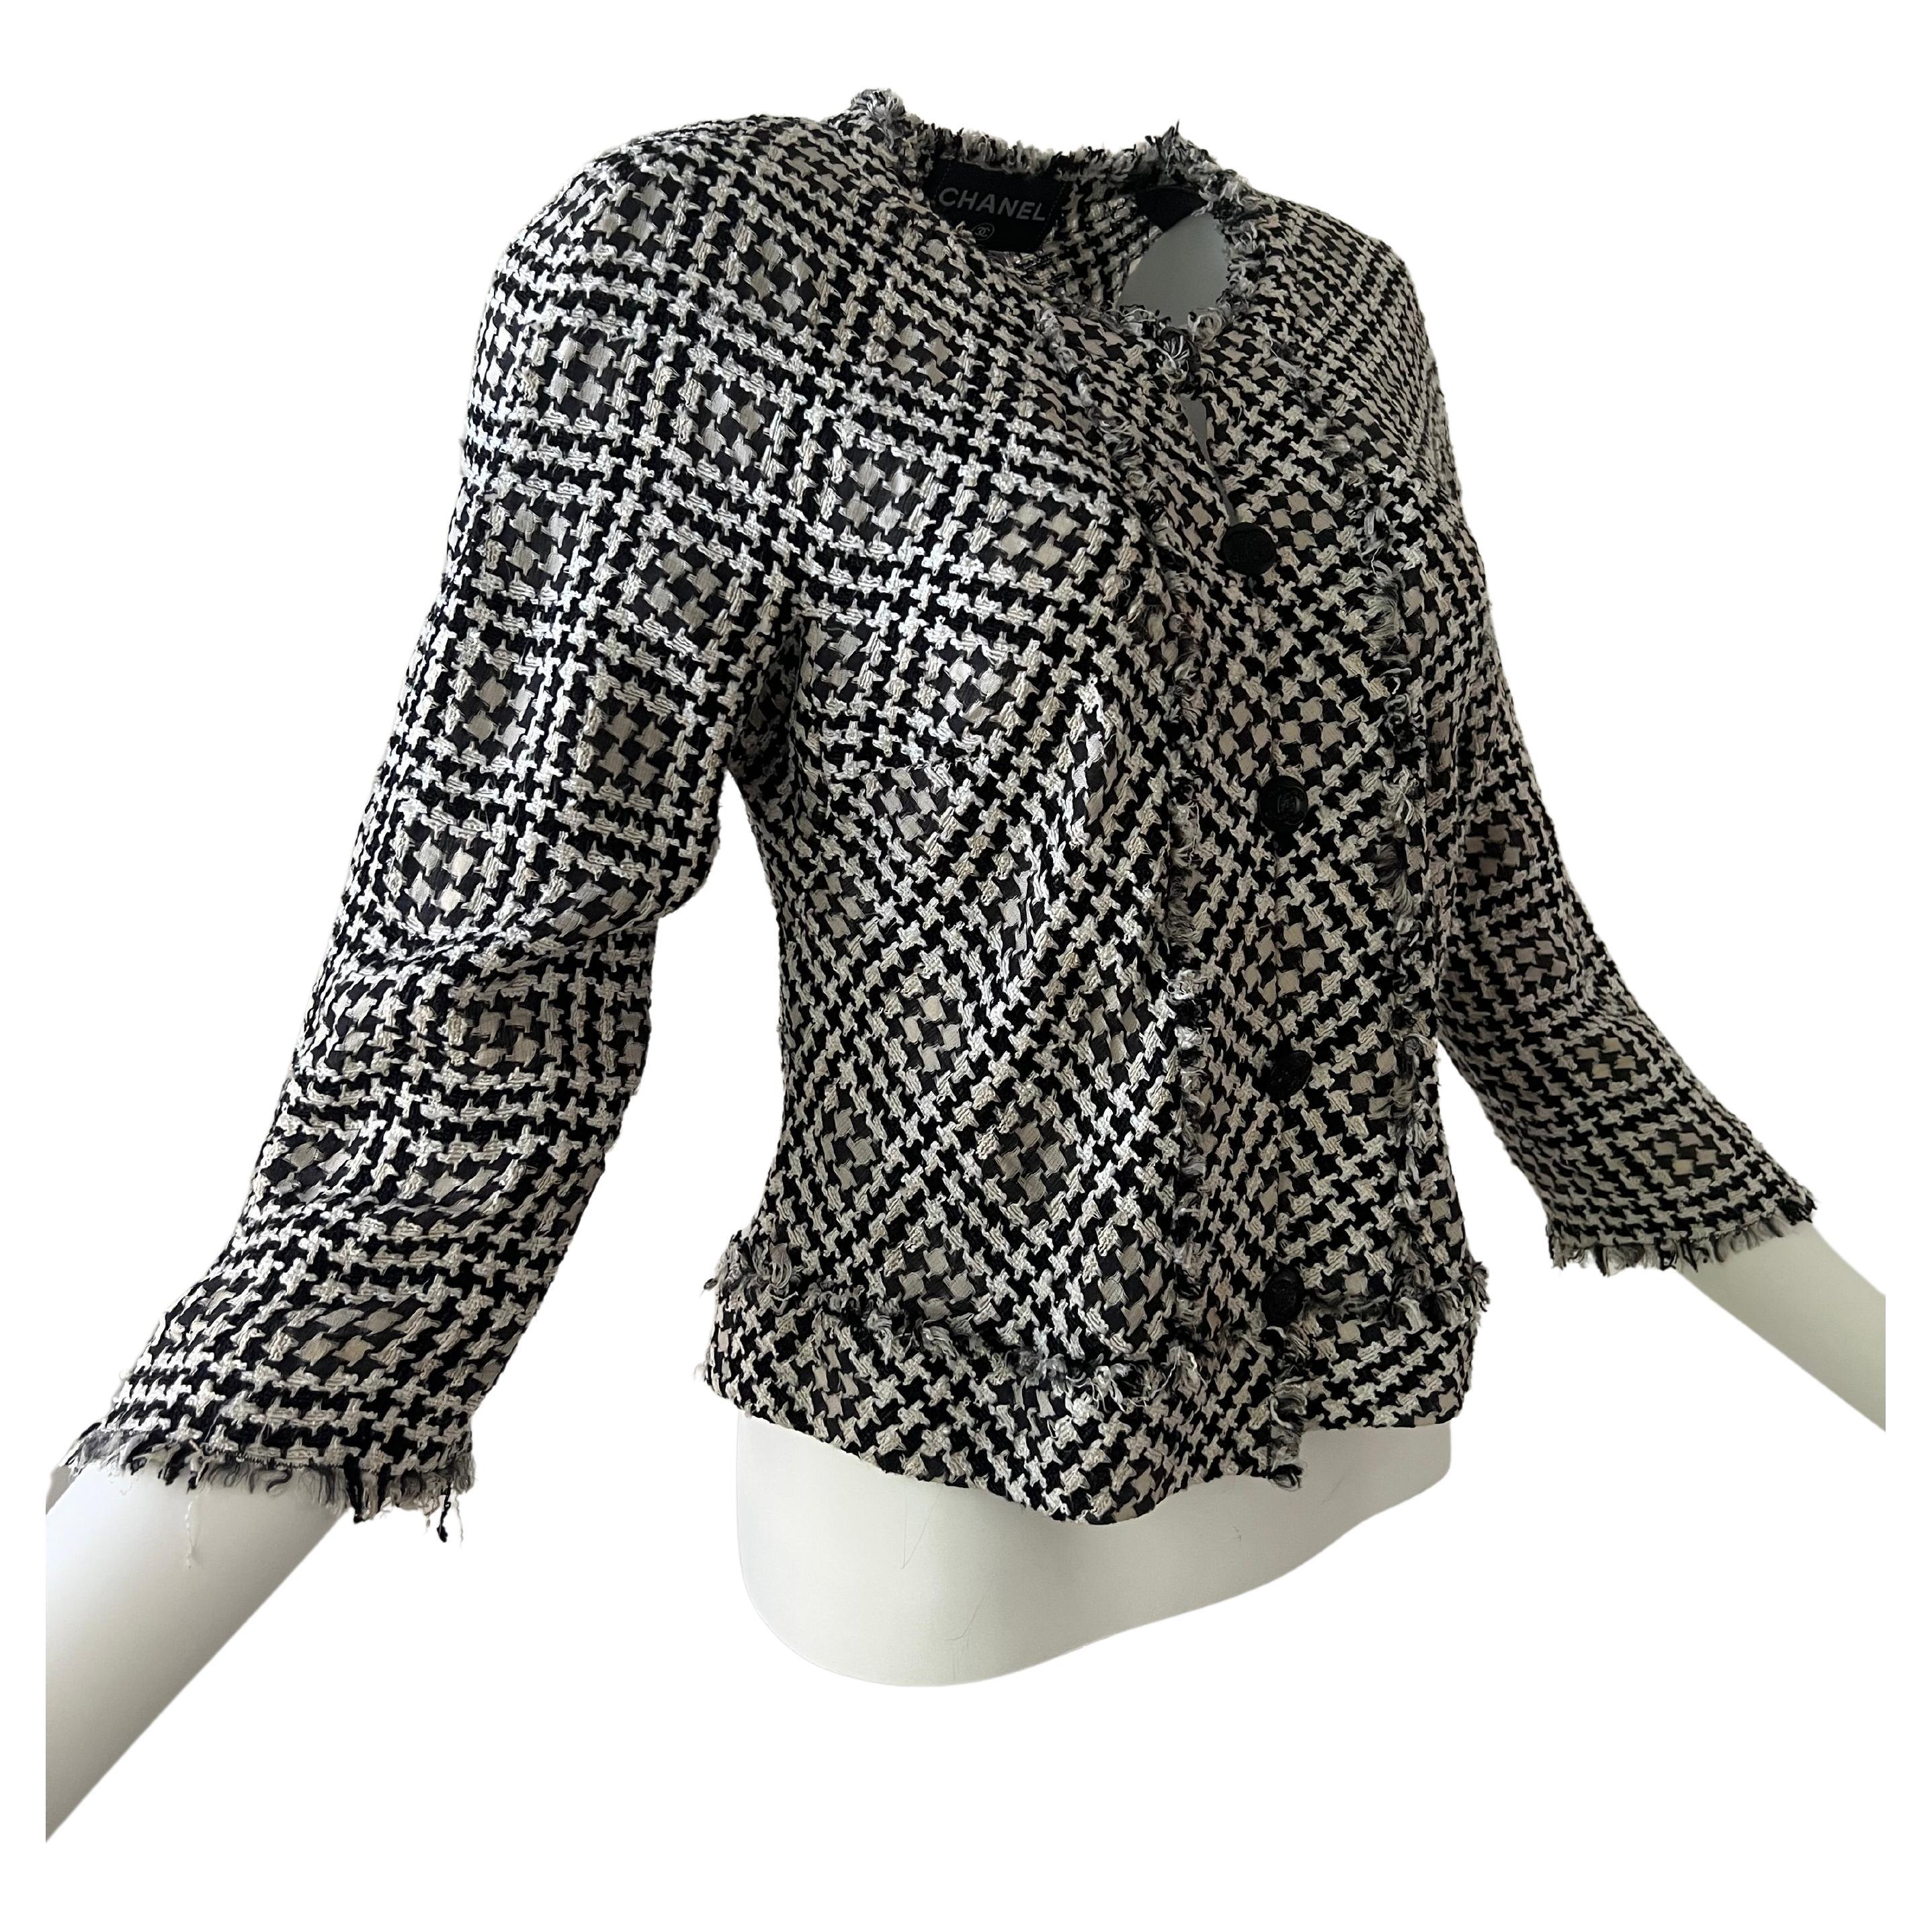 Chanel black and white checkered hounds tooth jacket, tweed braid on the front, at the waist and on the end of the sleeves. Five black Chanel buttons. Summer jacket without lining and very light. Made in France size 44.

